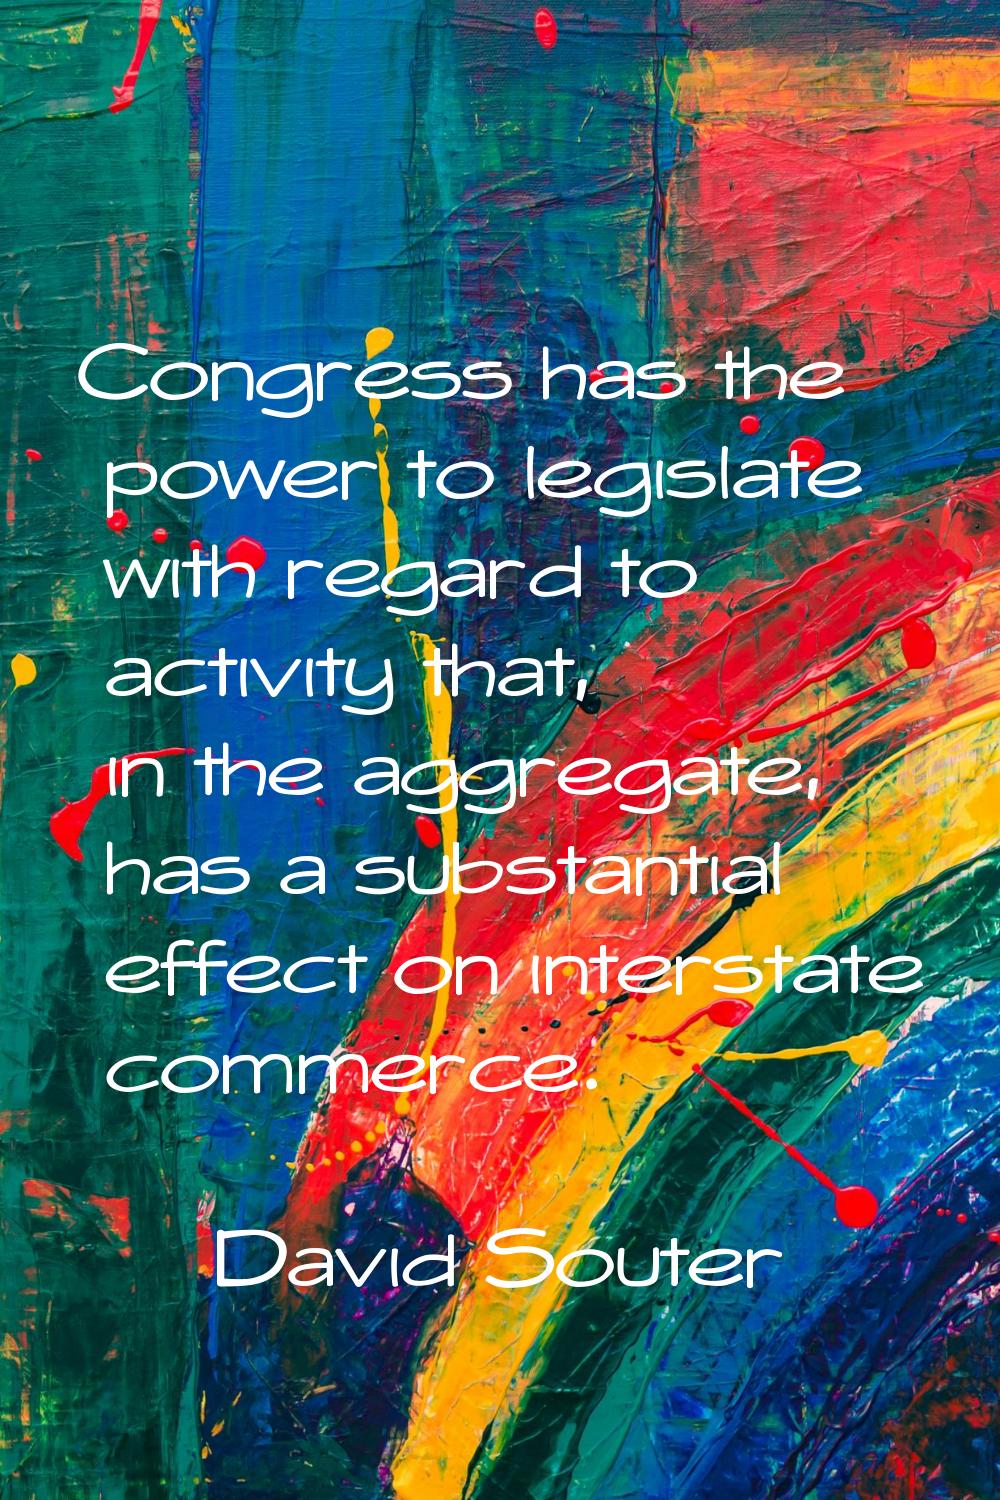 Congress has the power to legislate with regard to activity that, in the aggregate, has a substanti